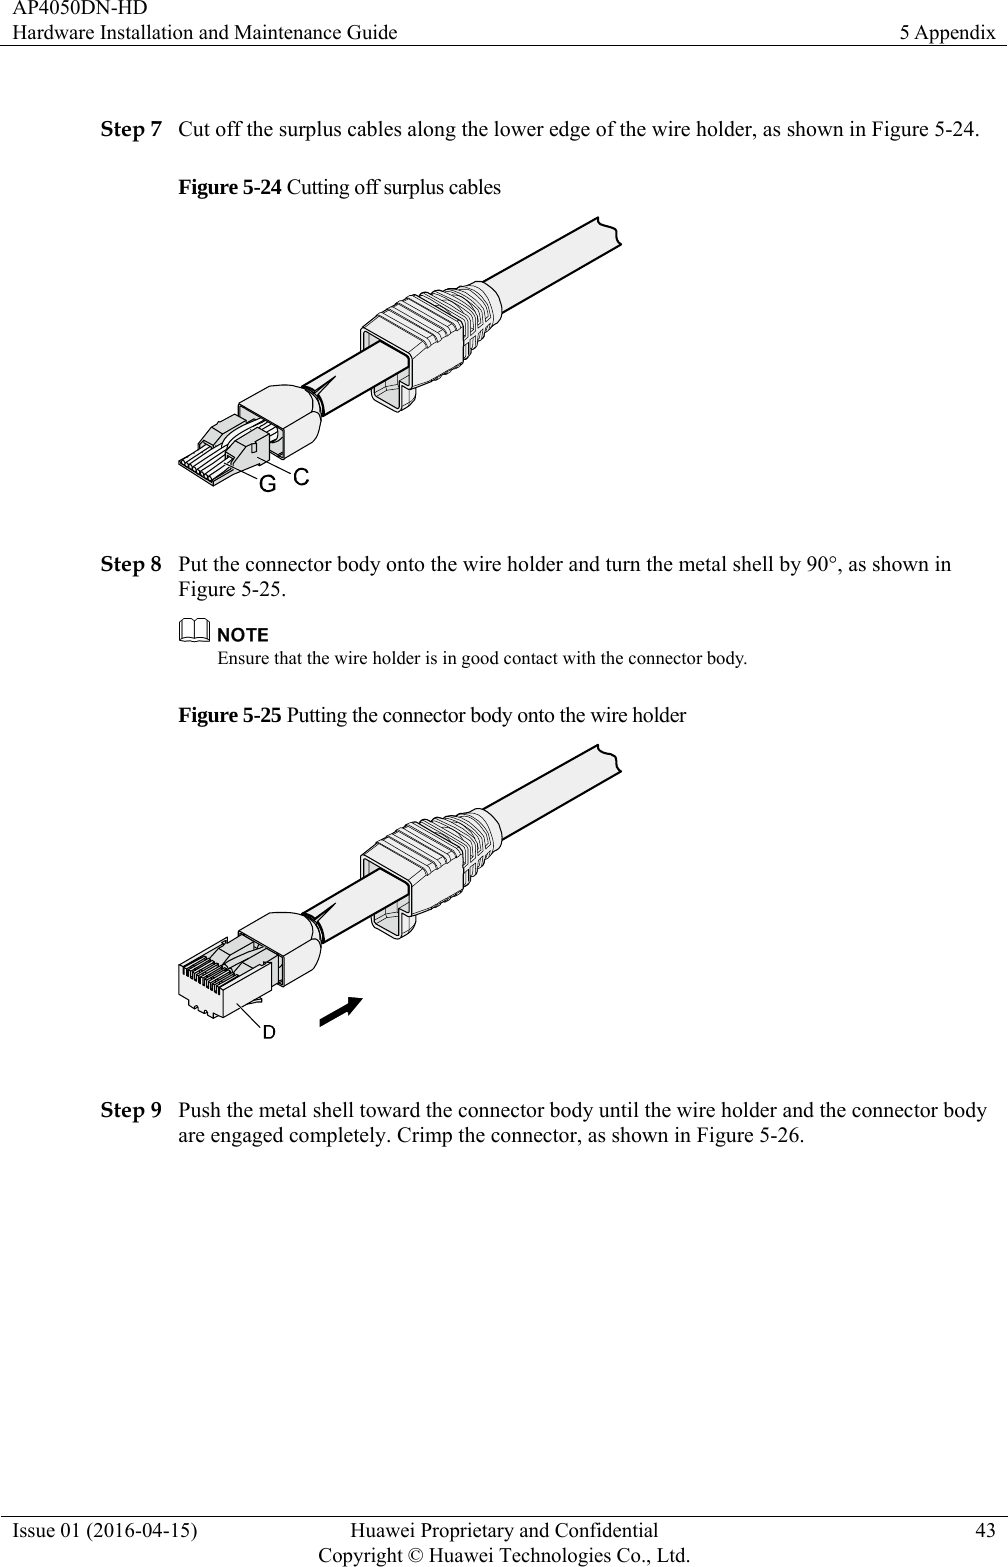 AP4050DN-HD Hardware Installation and Maintenance Guide  5 Appendix Issue 01 (2016-04-15)  Huawei Proprietary and Confidential         Copyright © Huawei Technologies Co., Ltd.43  Step 7 Cut off the surplus cables along the lower edge of the wire holder, as shown in Figure 5-24. Figure 5-24 Cutting off surplus cables   Step 8 Put the connector body onto the wire holder and turn the metal shell by 90°, as shown in Figure 5-25.  Ensure that the wire holder is in good contact with the connector body. Figure 5-25 Putting the connector body onto the wire holder   Step 9 Push the metal shell toward the connector body until the wire holder and the connector body are engaged completely. Crimp the connector, as shown in Figure 5-26. 